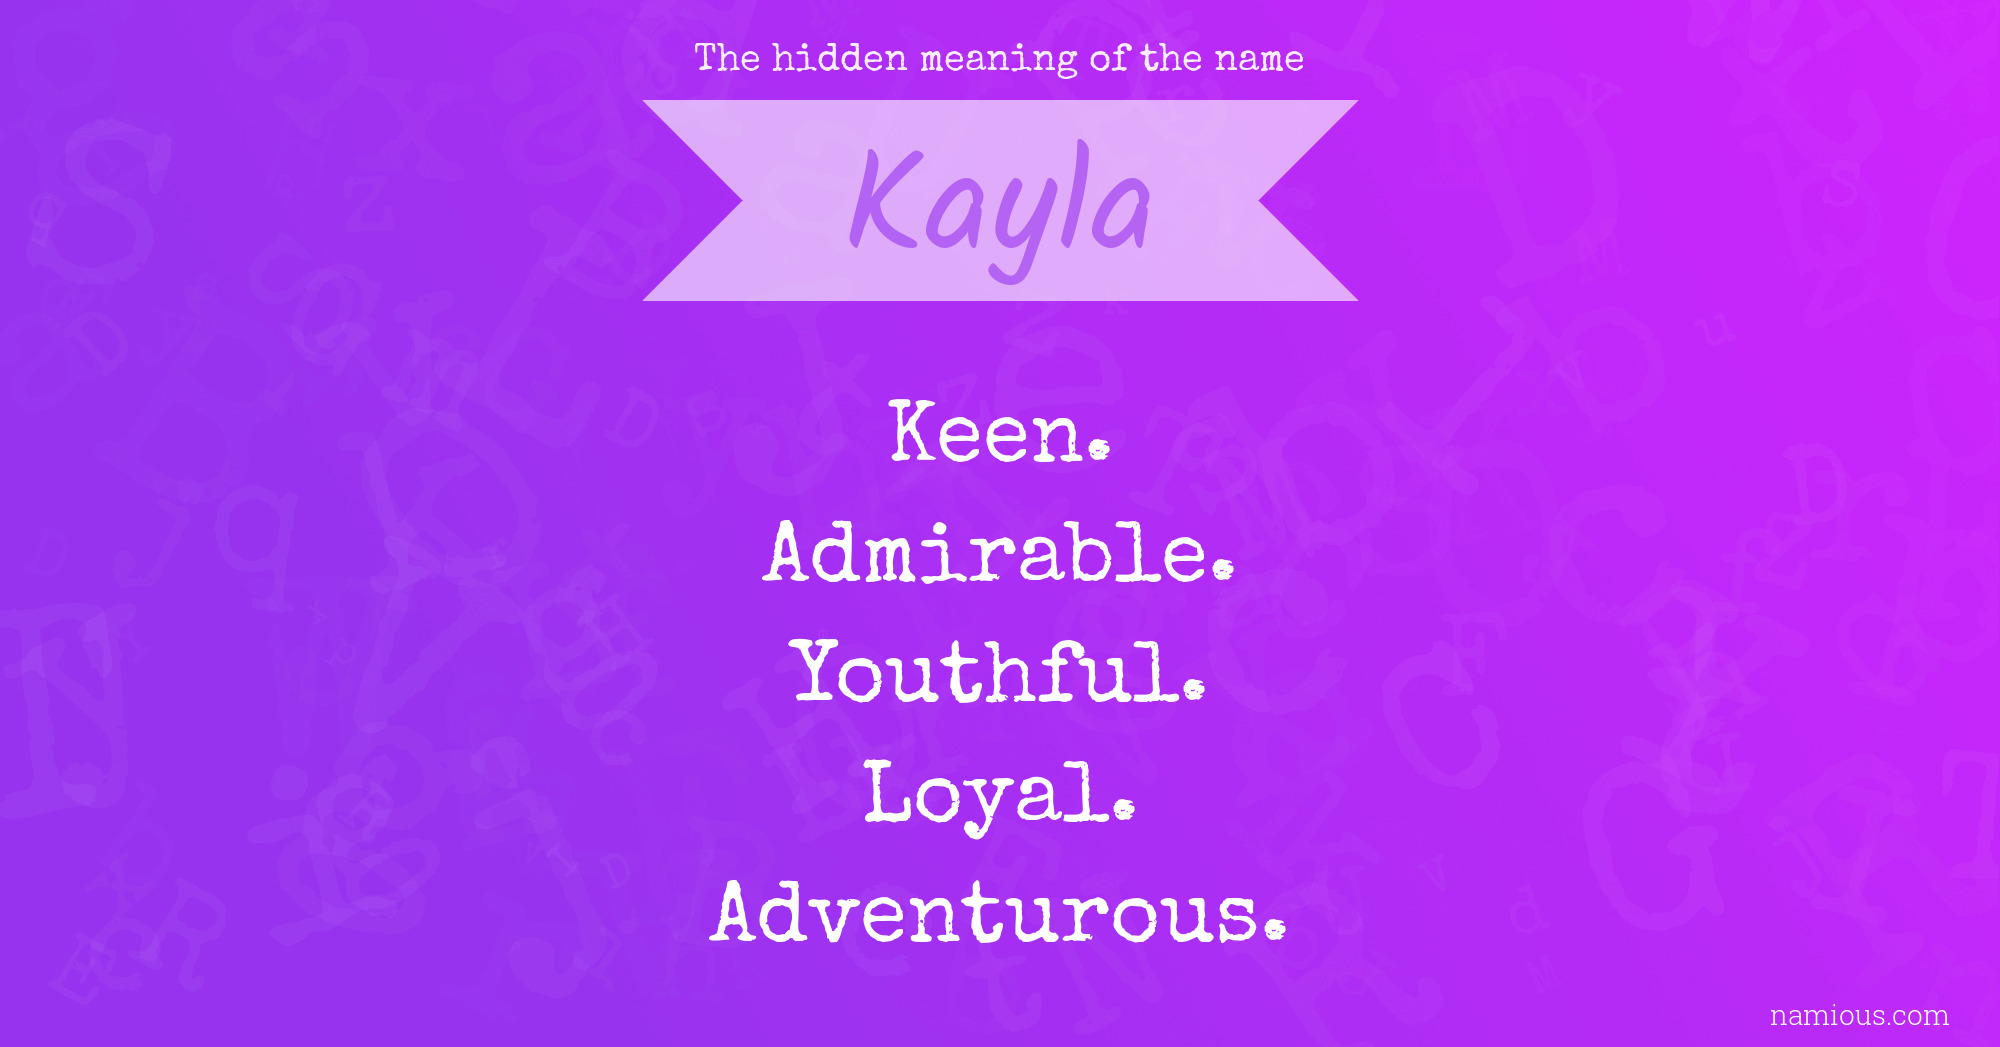 The hidden meaning of the name Kayla